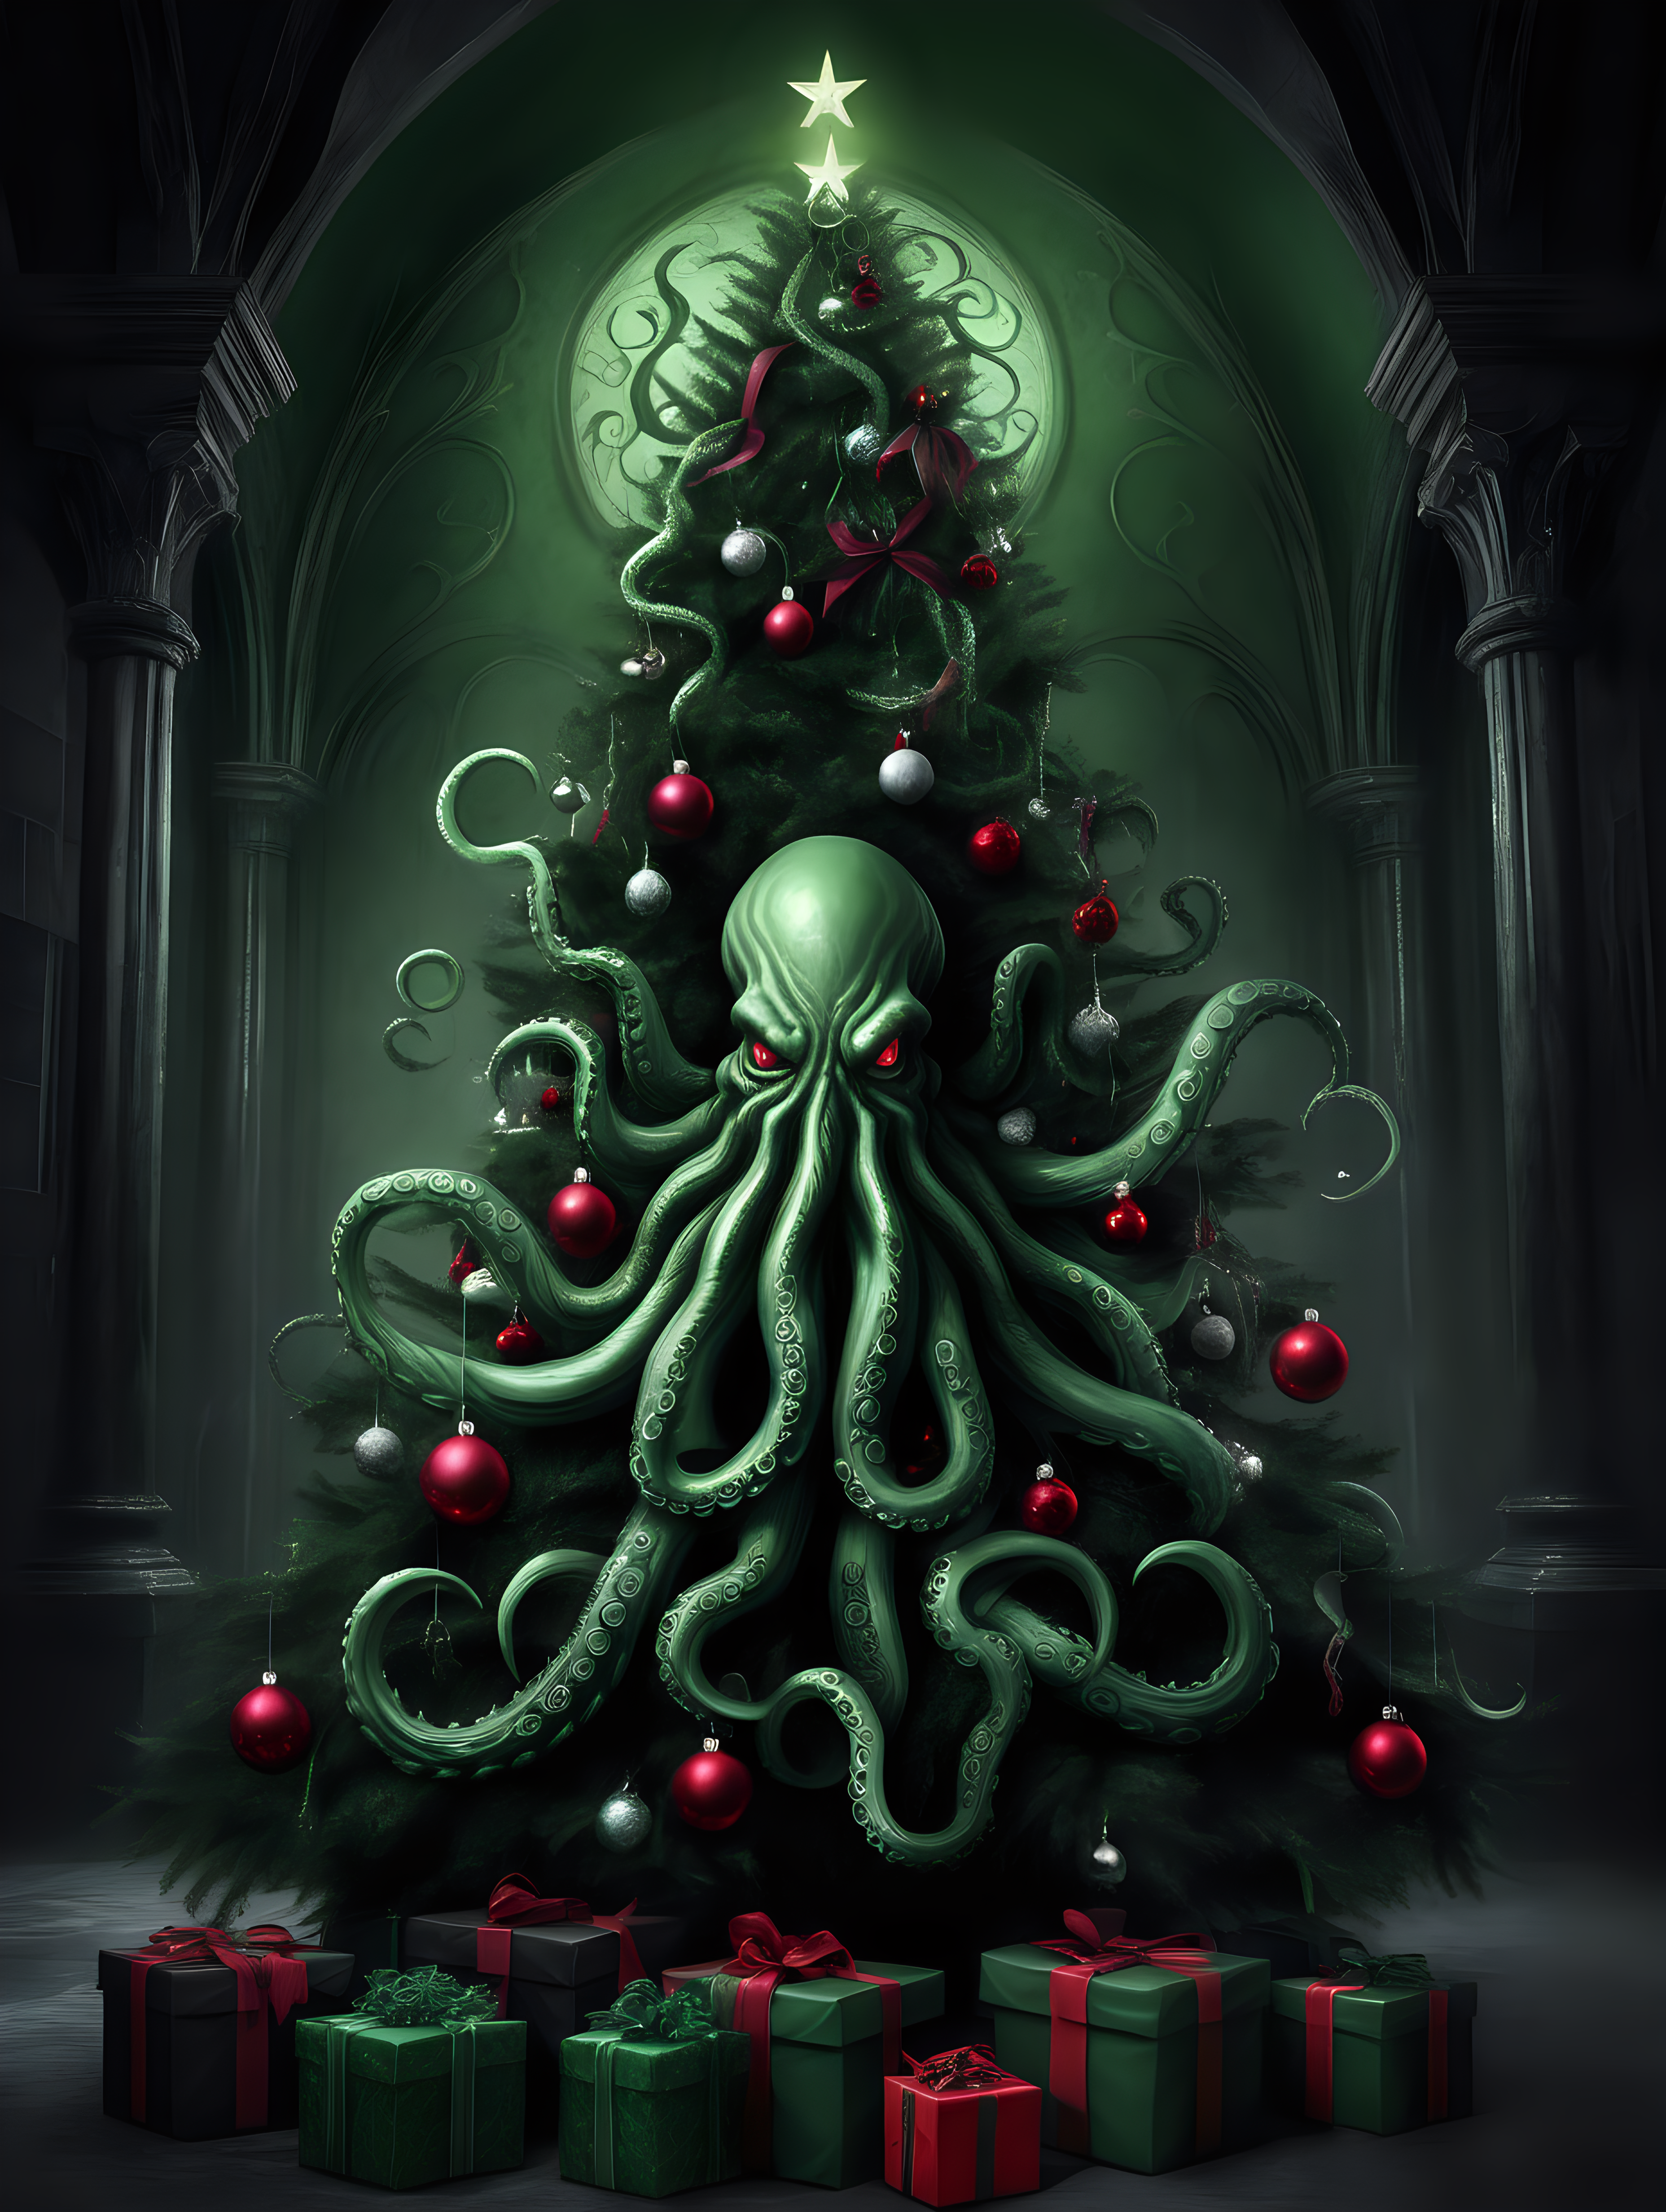 Gothic Christmas tree with Cthulhu’s tentacles reaching through it. Must be dark and gothic with eldritch themes. Presents under the tree must also be dark and gothic in a variety of shapes and dark colours. The background must feel sinister and creepy. The tentacles should be dark green. Make it very eldritch 